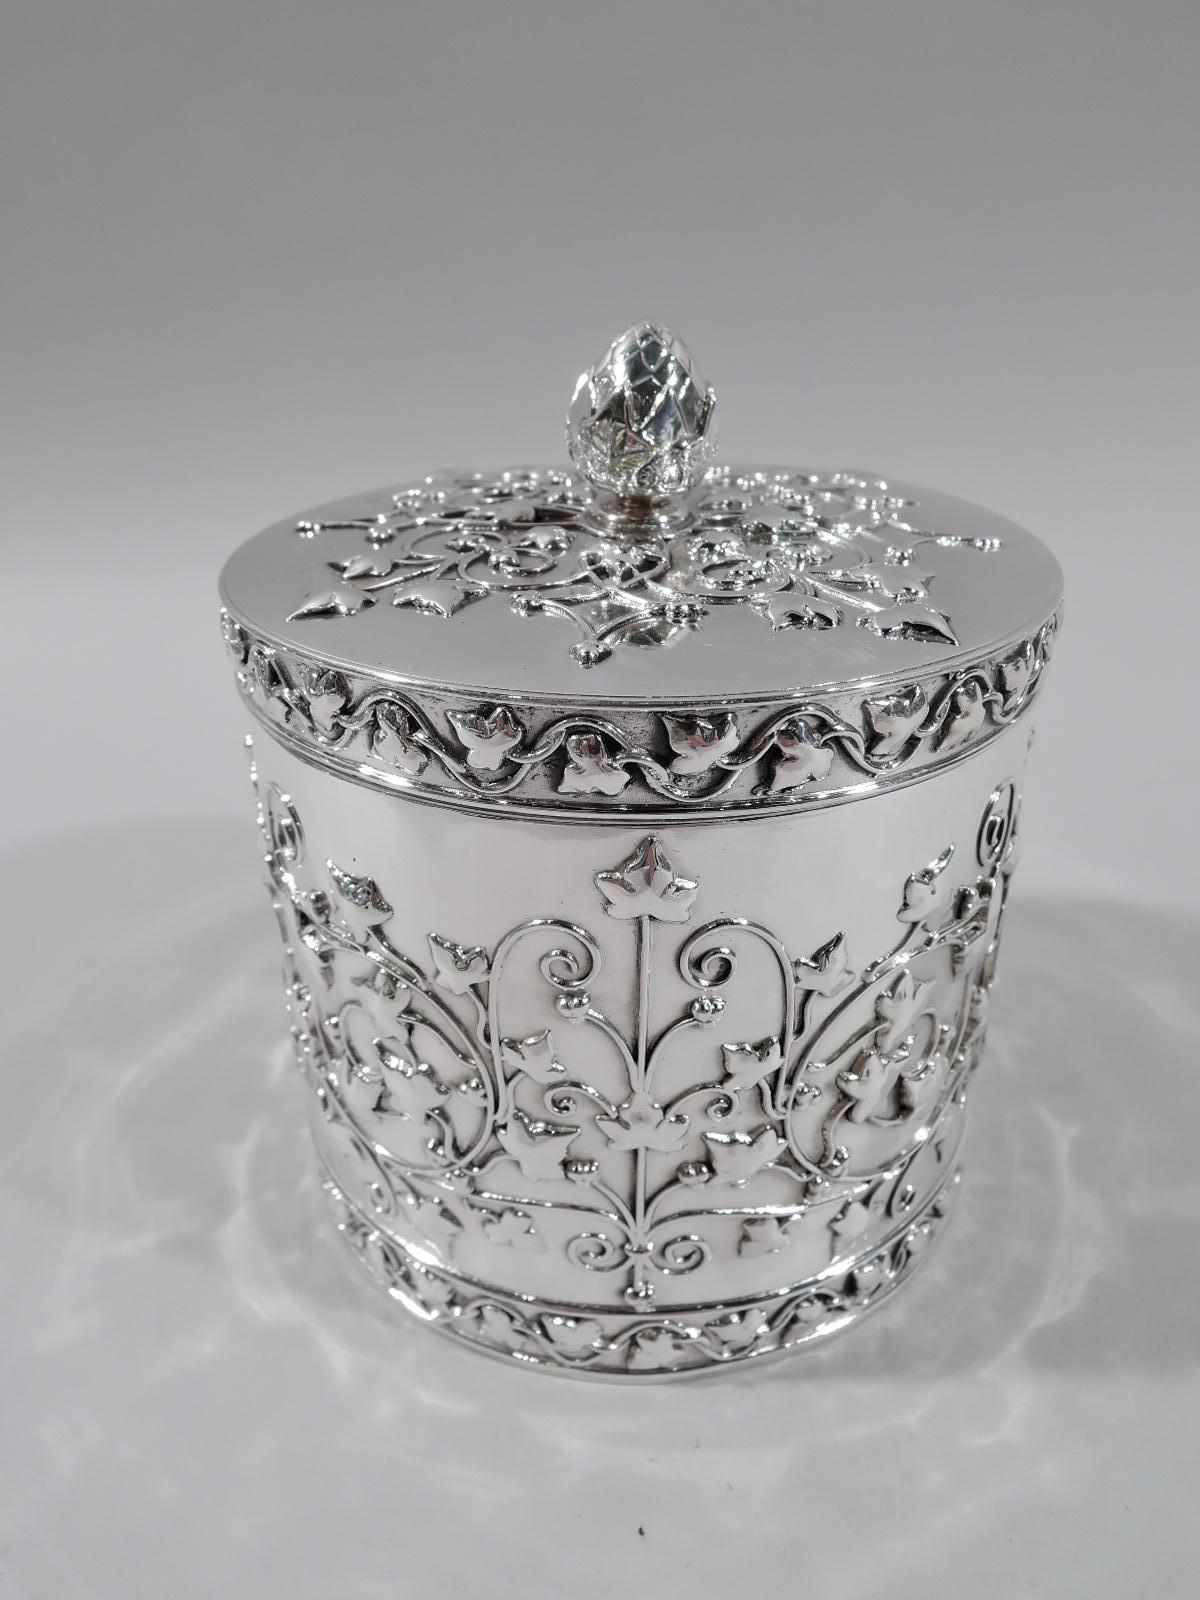 Aesthetic Revival sterling silver tea caddy. Retailed by Tiffany & Co. in New York. Drum form and flat cover with acorn finial. Applied tracery-style ornament with stylized vegetation and scrollwork between wavy leafing-branch borders. Perfect for a